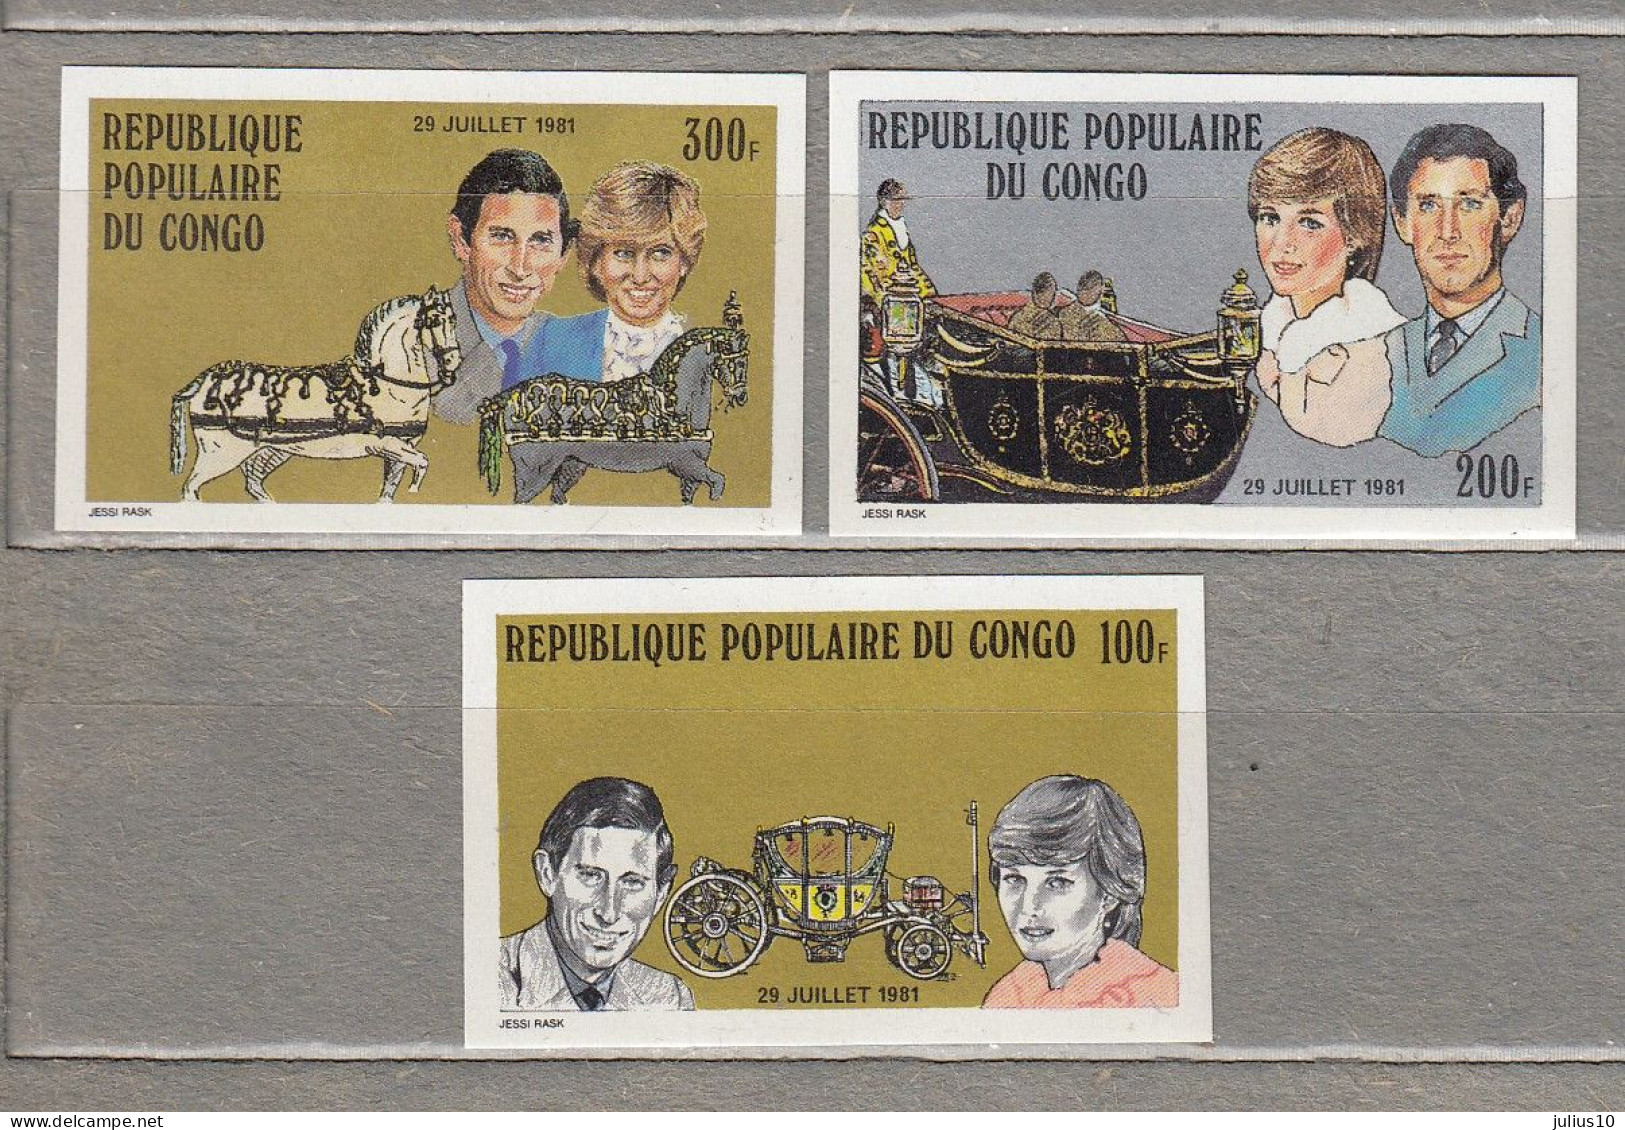 CONGO R.D. Imperforated 1981 Diana Wedding Mi 832-834 MNH (**) #33952 - Mint/hinged